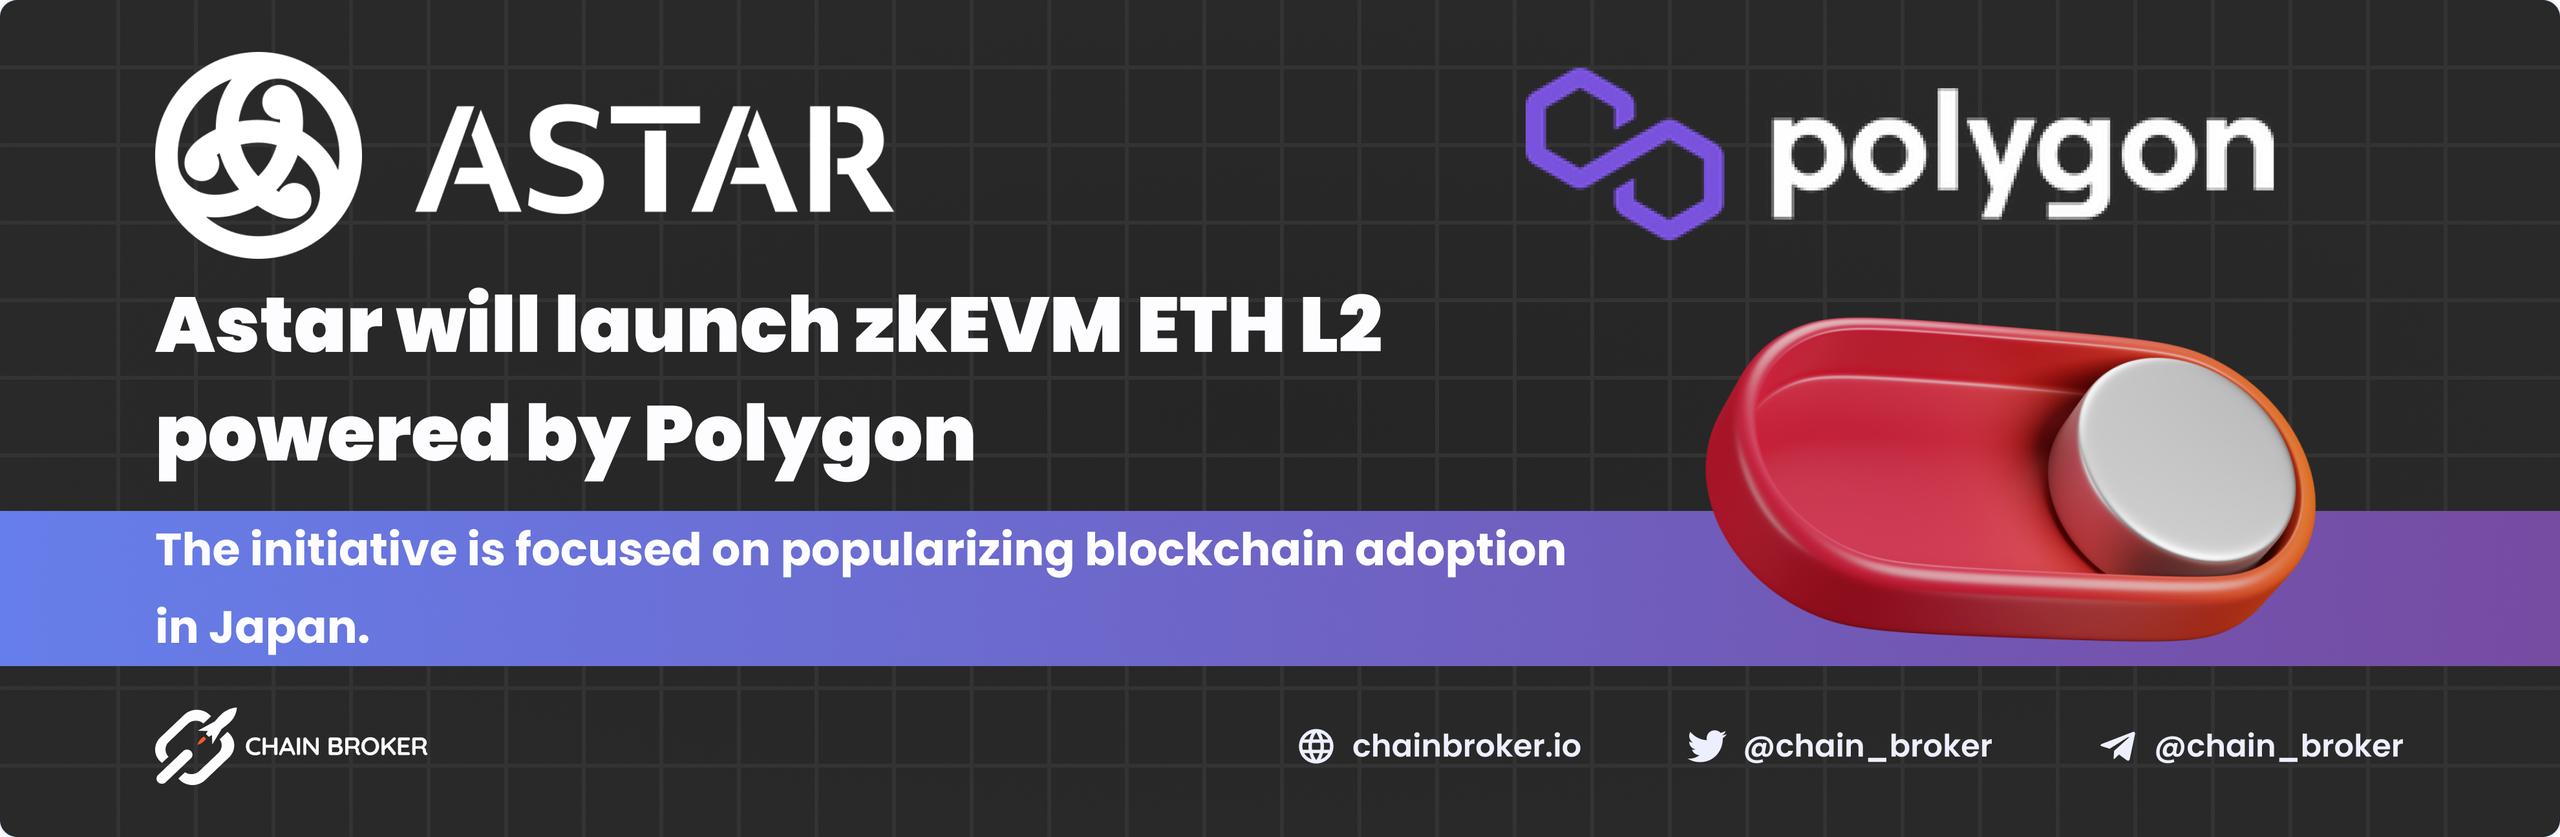 Astar will launch zkEVM Ethereum Layer 2 powered by Polygon.